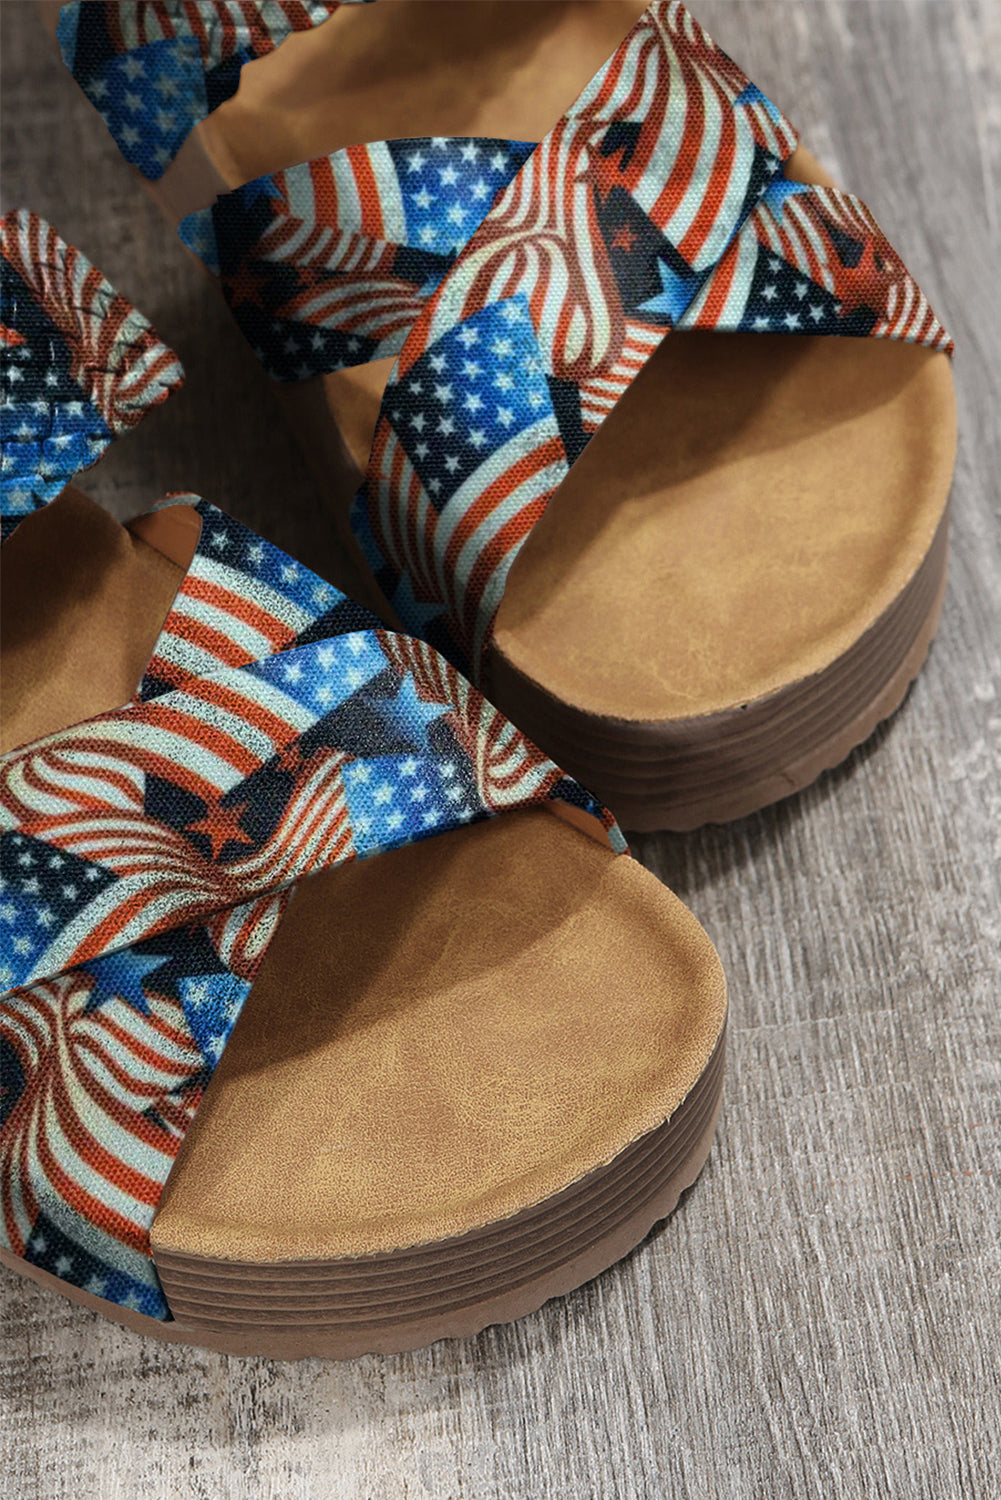 Real Teal American Flag Print Suede Cross Straps Slippers Slippers JT's Designer Fashion